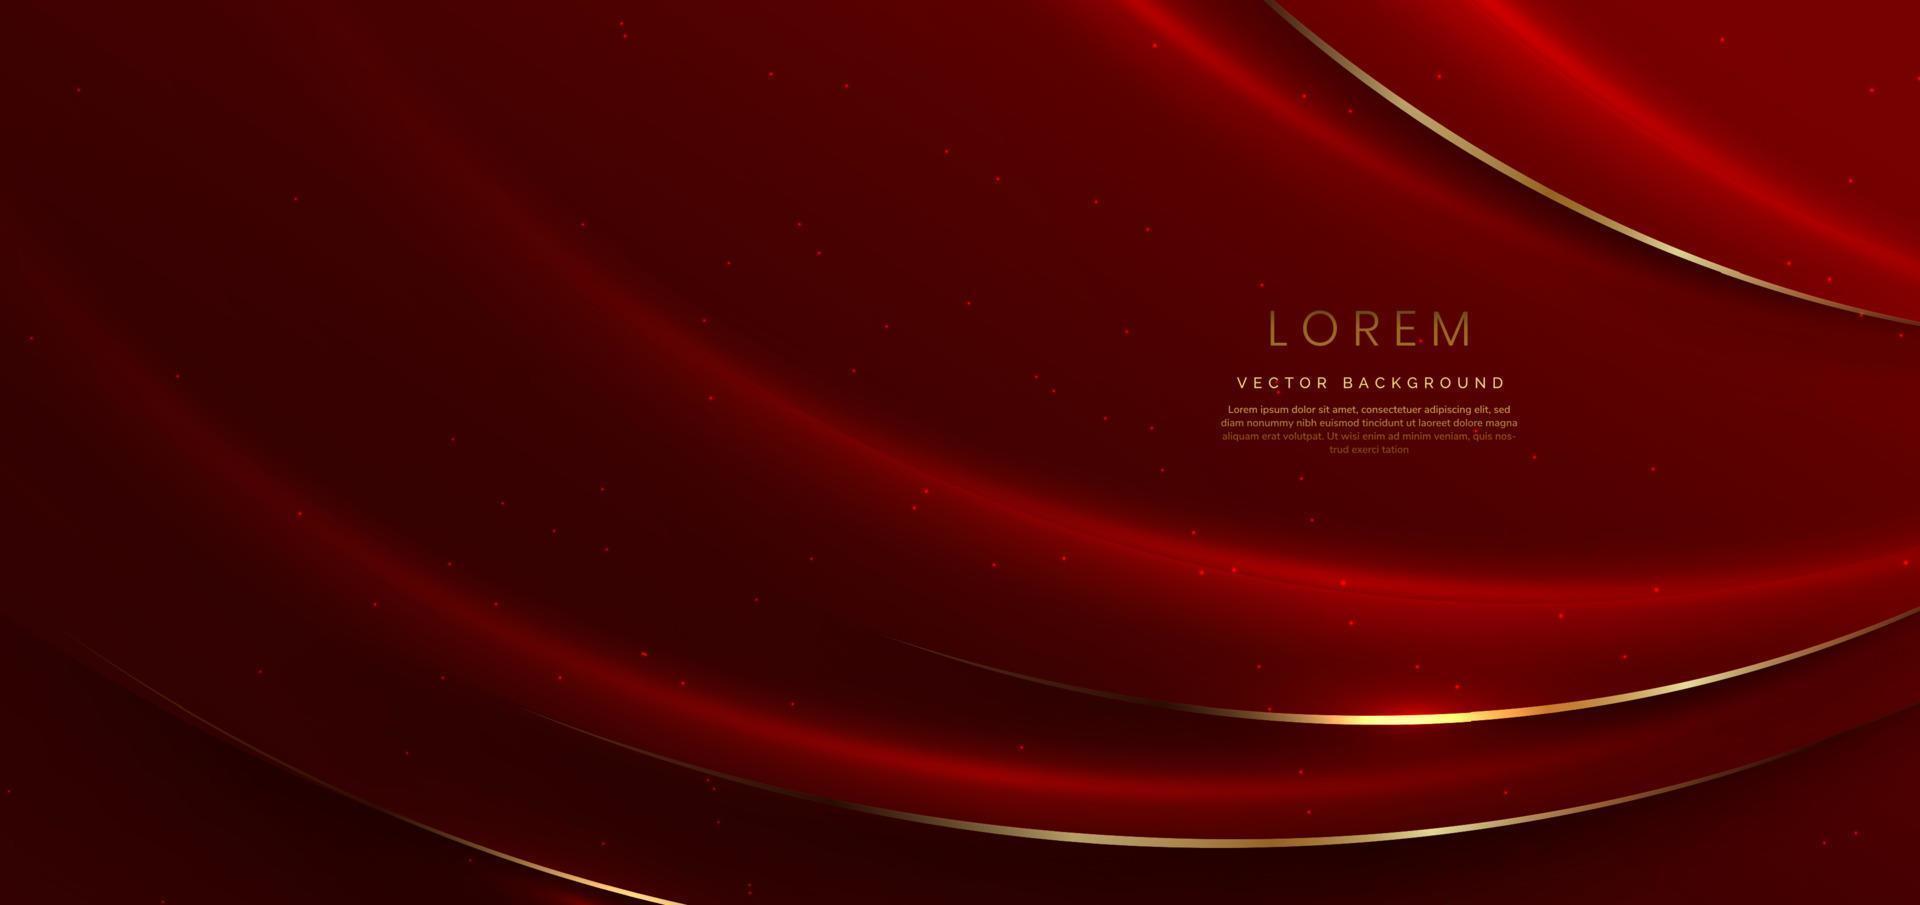 Abstract 3d curved red shape on red background with lighting effect and sparkle with copy space for text. vector